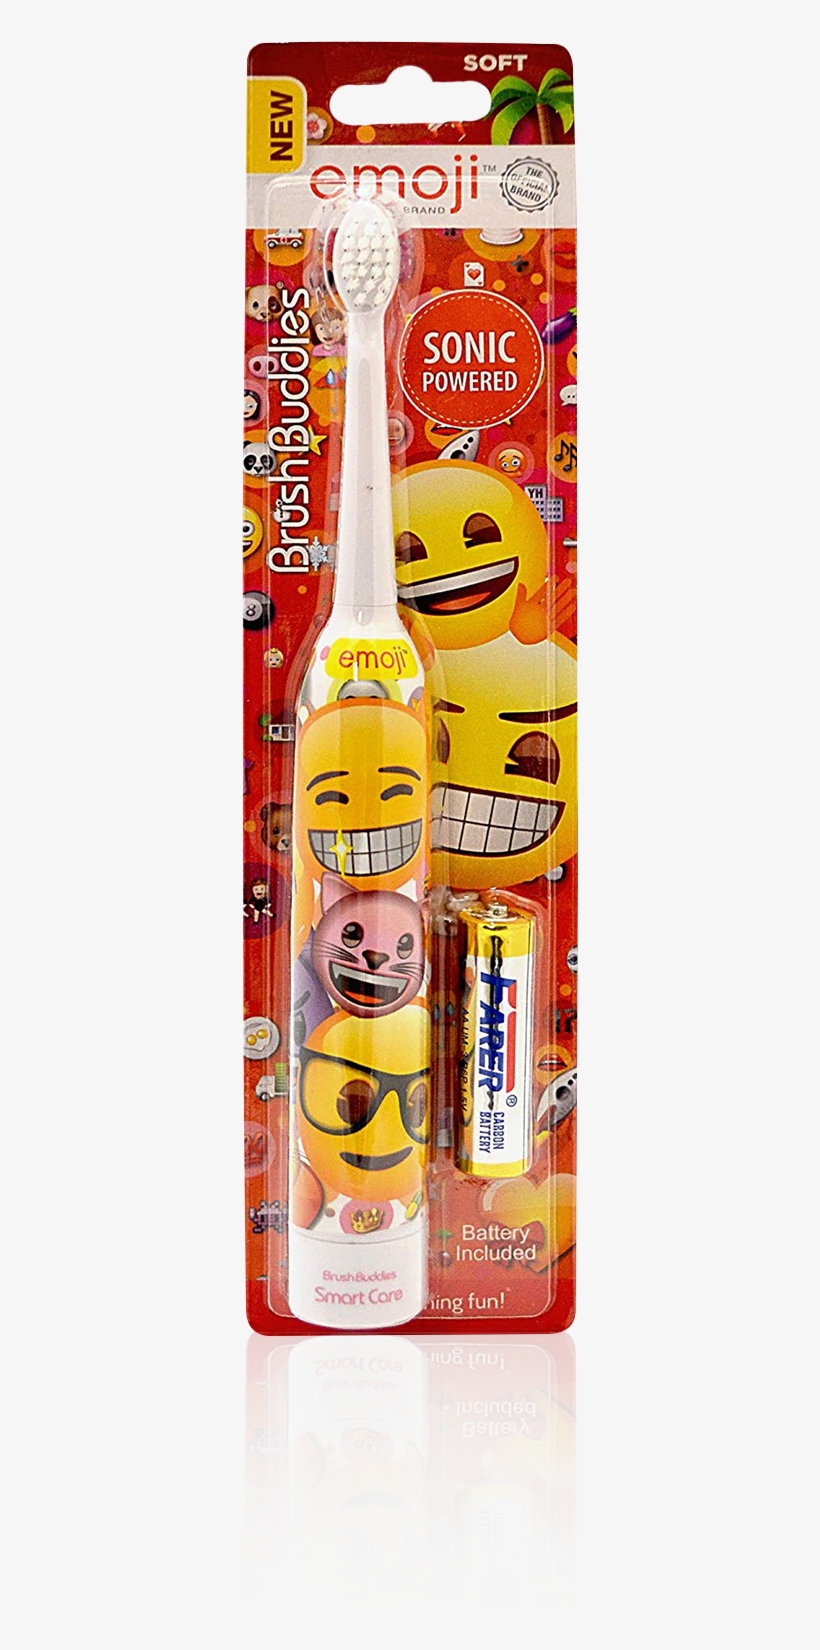 Load Image Into Gallery Viewer, Brush Buddies Emoji - Brush Buddies Emoji Sonic Powered Toothbrush, transparent png #6441406